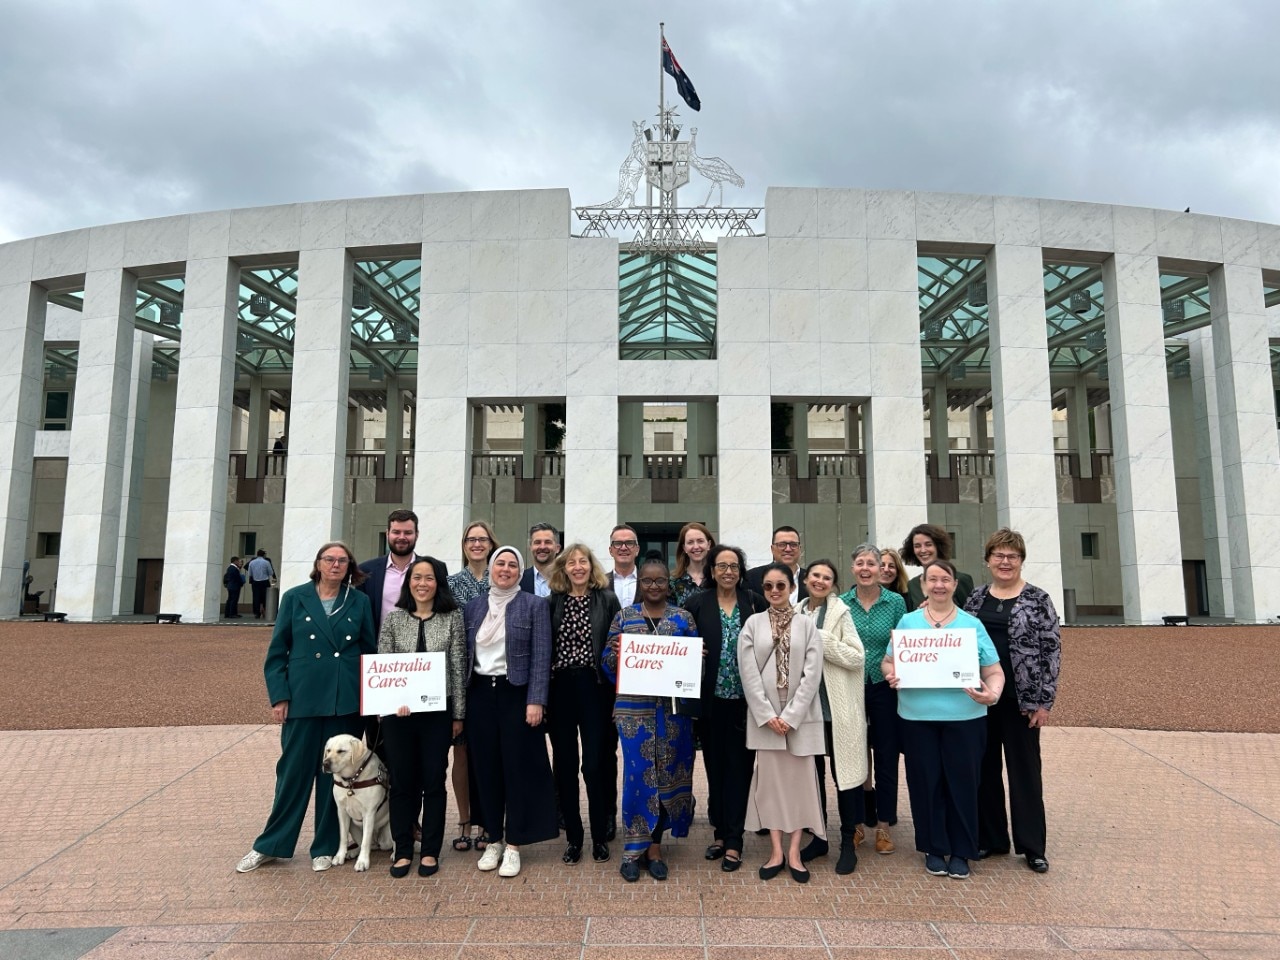 A group of people stand in front of Parliament House in Canberra holding signs that read "Australia Cares"